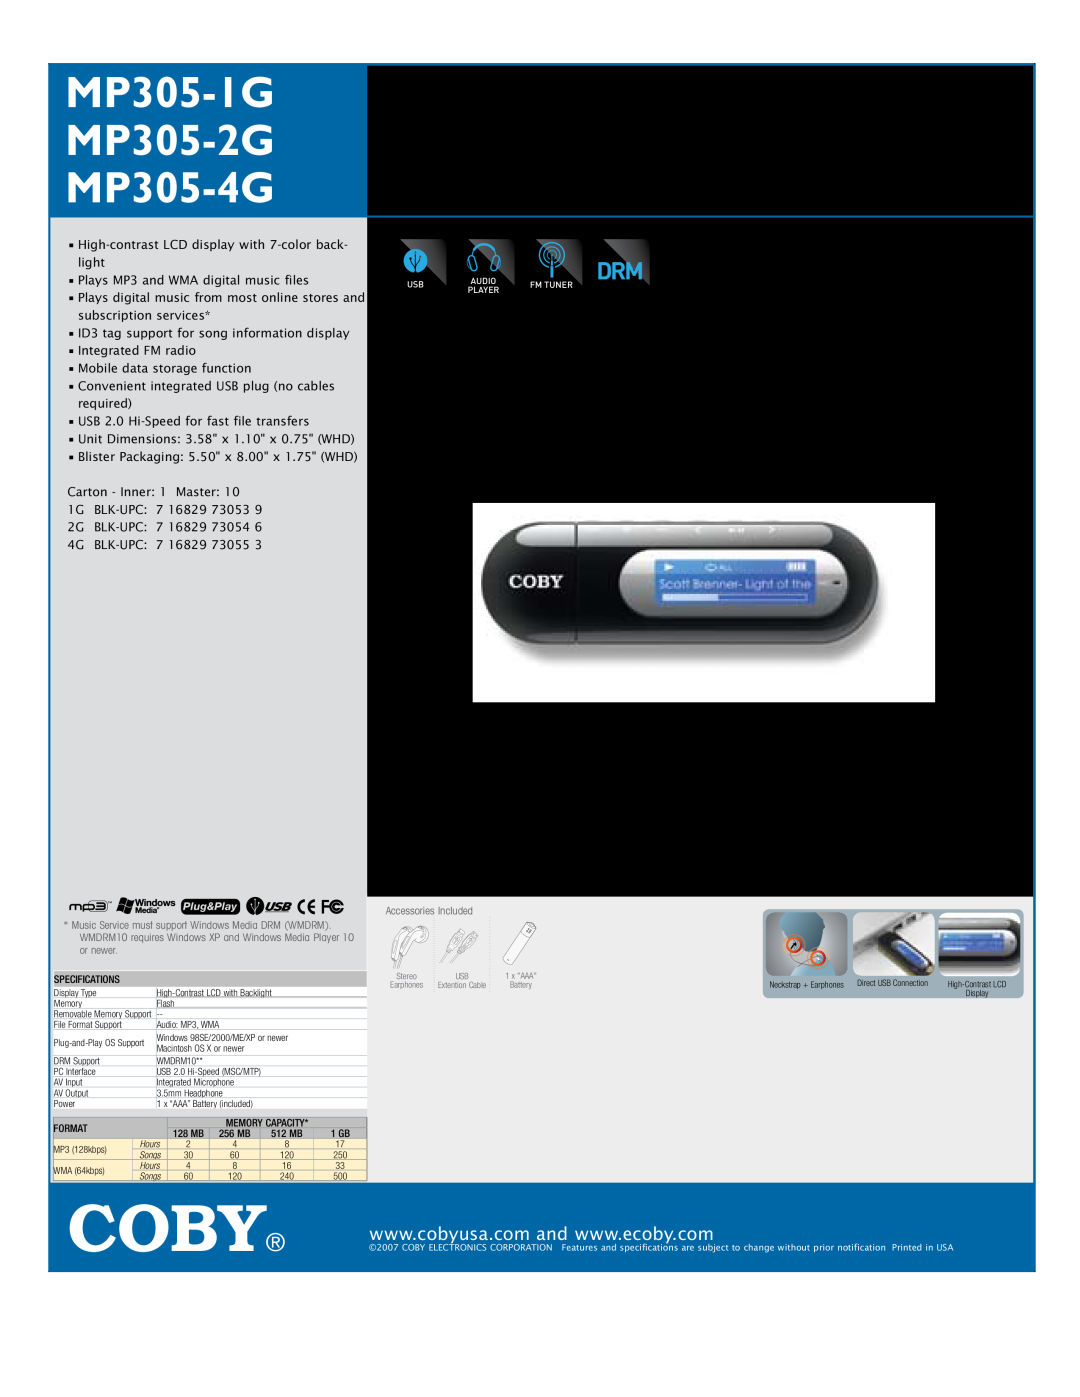 COBY electronic specifications Coby, MP305-1G MP305-2G MP305-4G, USB-Stick MP3 Player with LCD DISPLAY and radio 